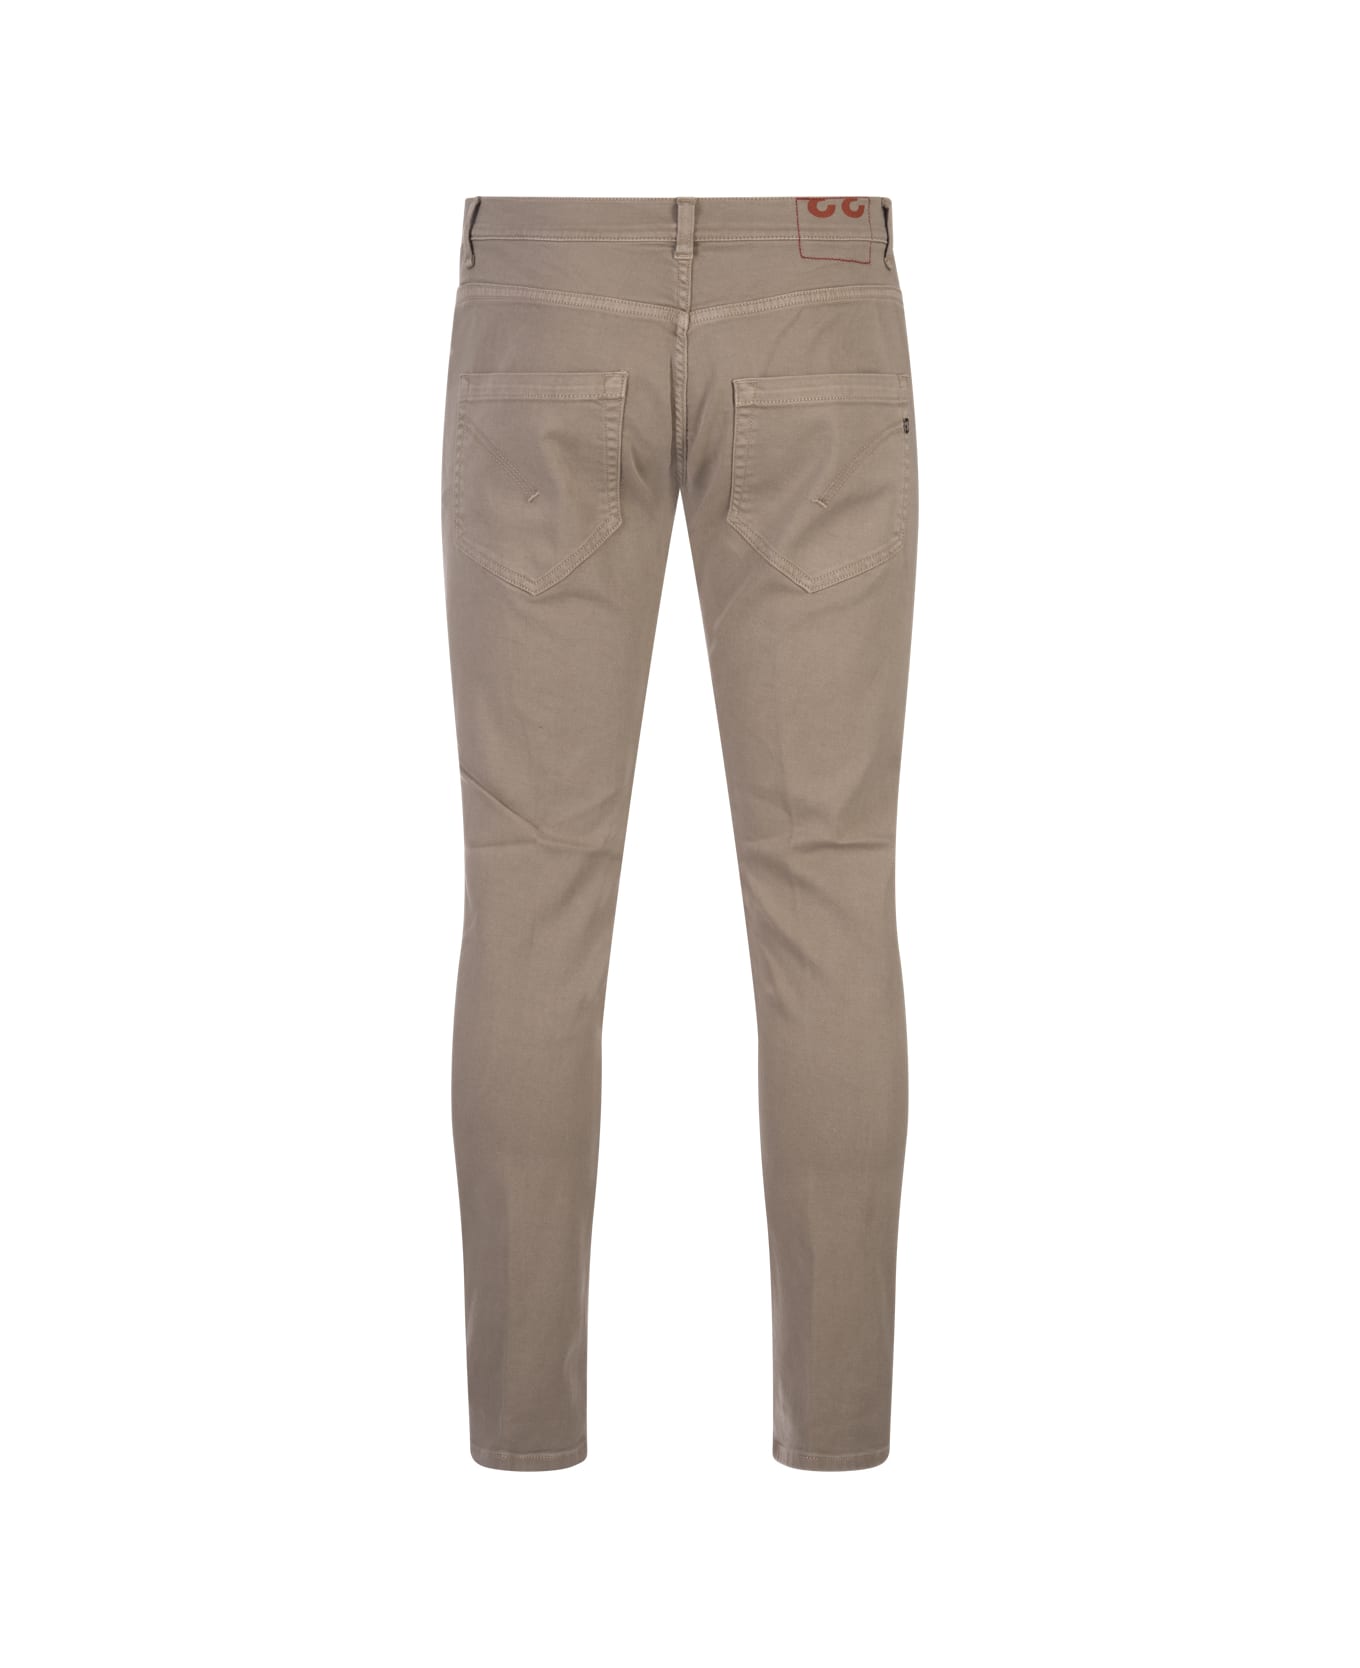 Dondup Mius Slim Fit Jeans In Sand Bull Stretch - Brown デニム